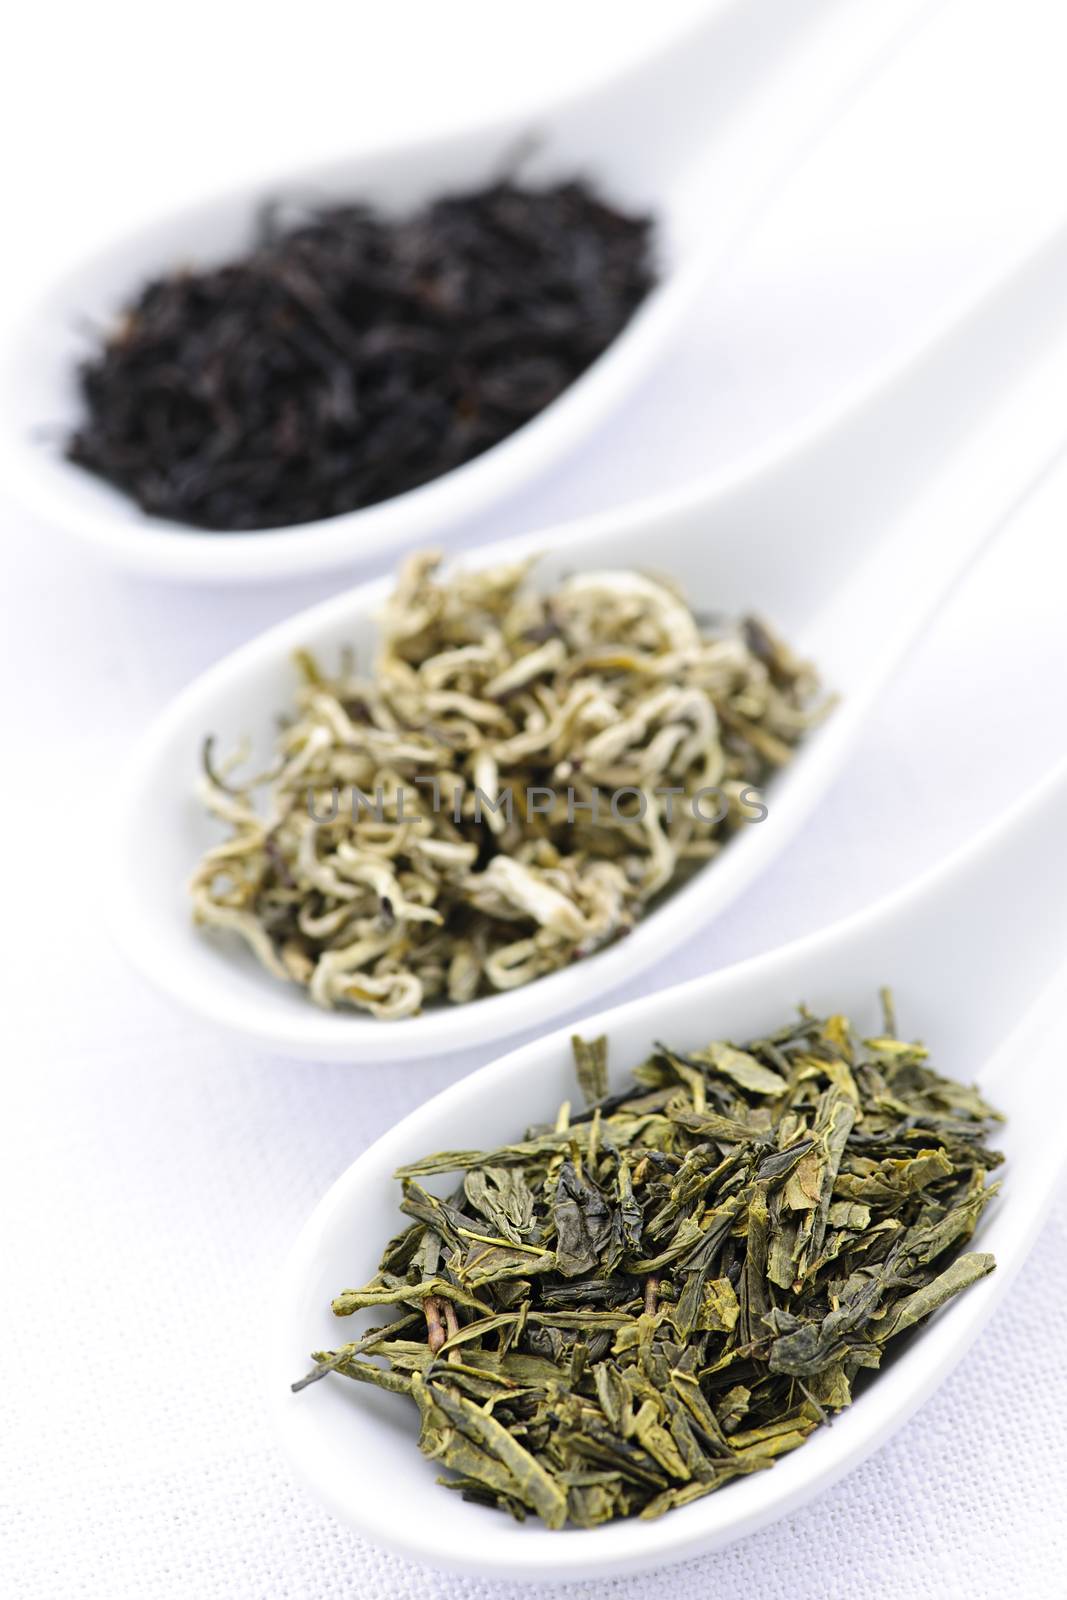 Black, white and green dry tea leaves in spoons